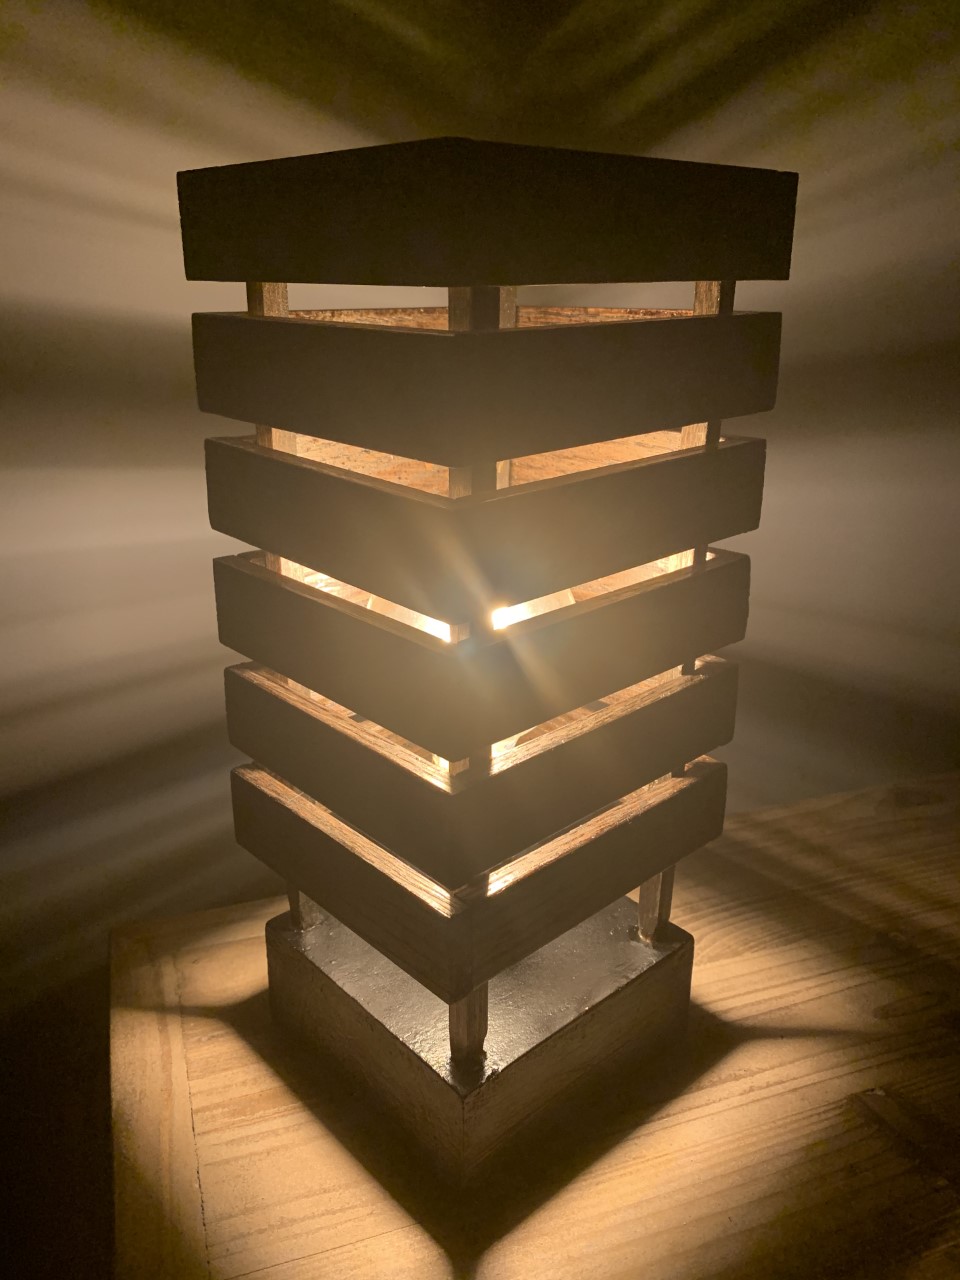 A bulb covered with wooden slats that allow light to shine through.